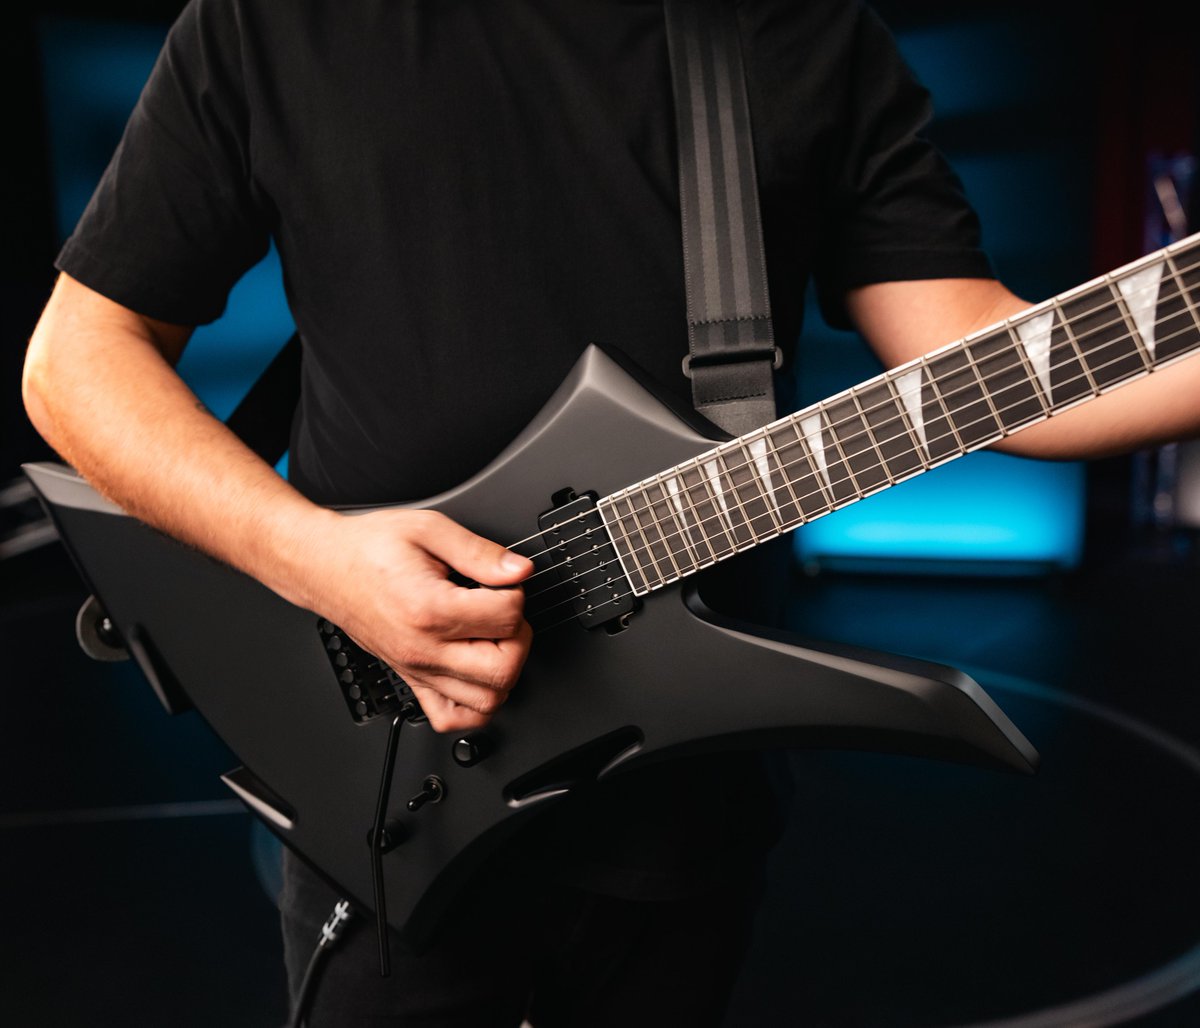 Boasting an electrifying angular shape and lightning-fast neck, the new Concept Series King Kelly exudes metal sophistication while also delivering massive sound. Take a look: bit.ly/3V9EMCz